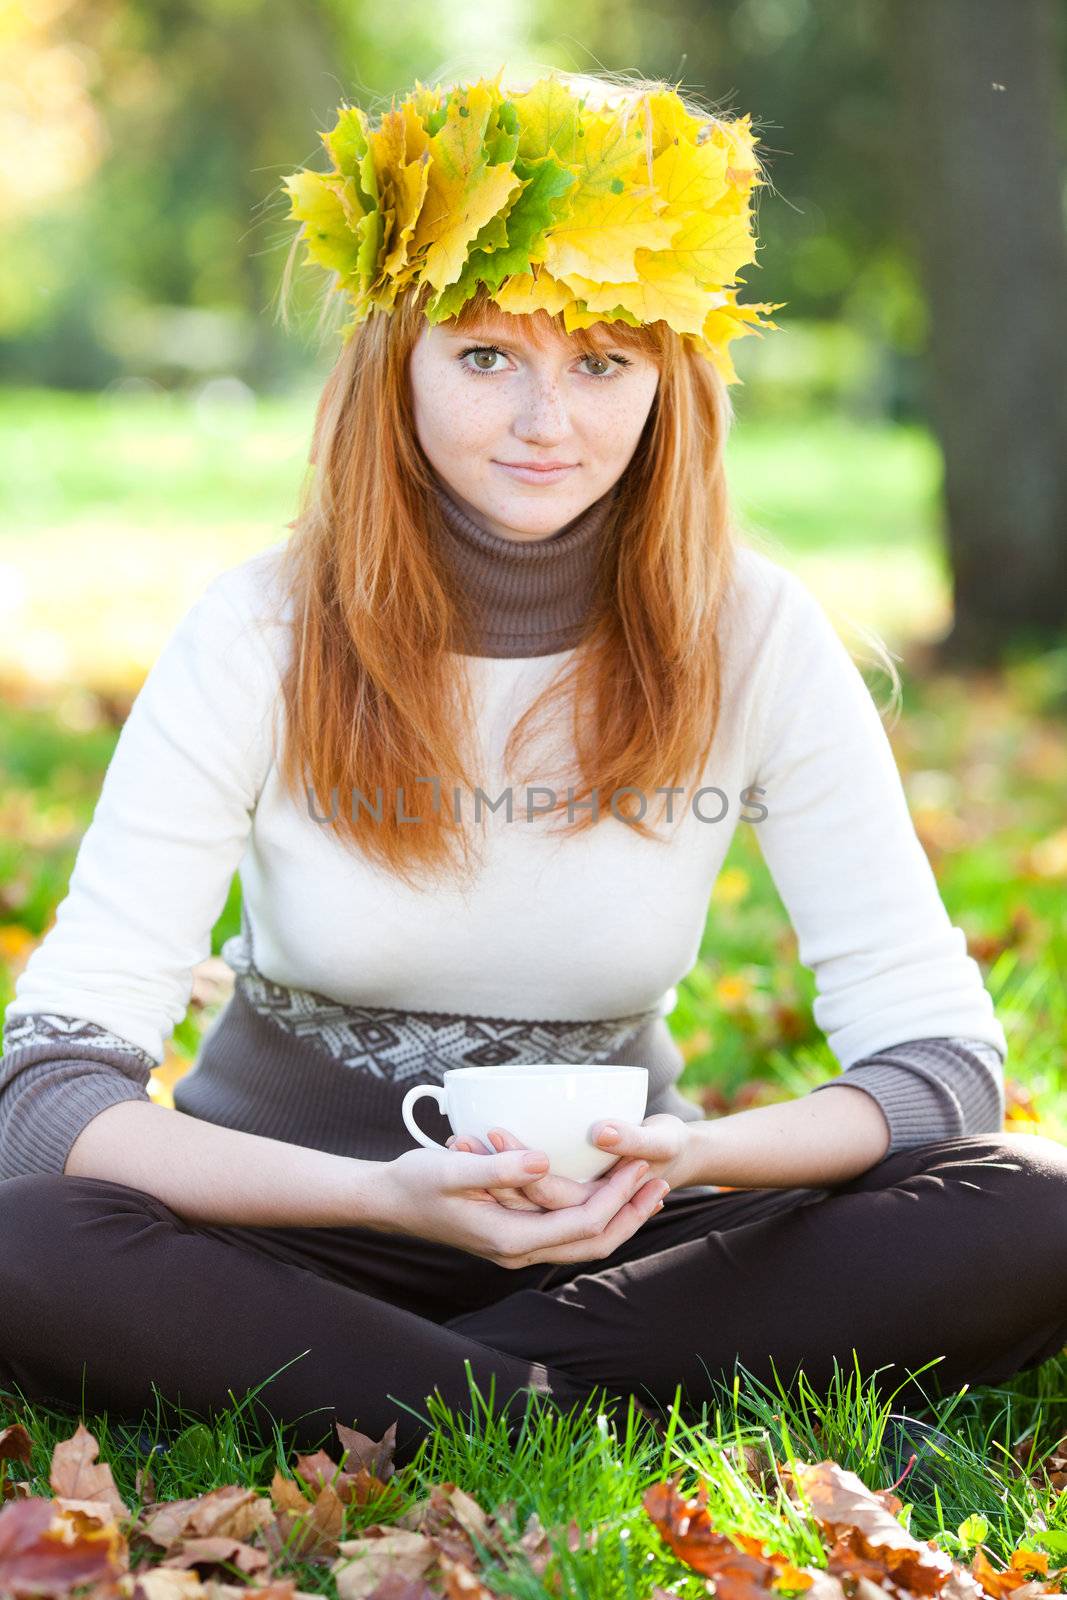 young redhead teenager woman in a wreath of maple leaves with cu by jannyjus